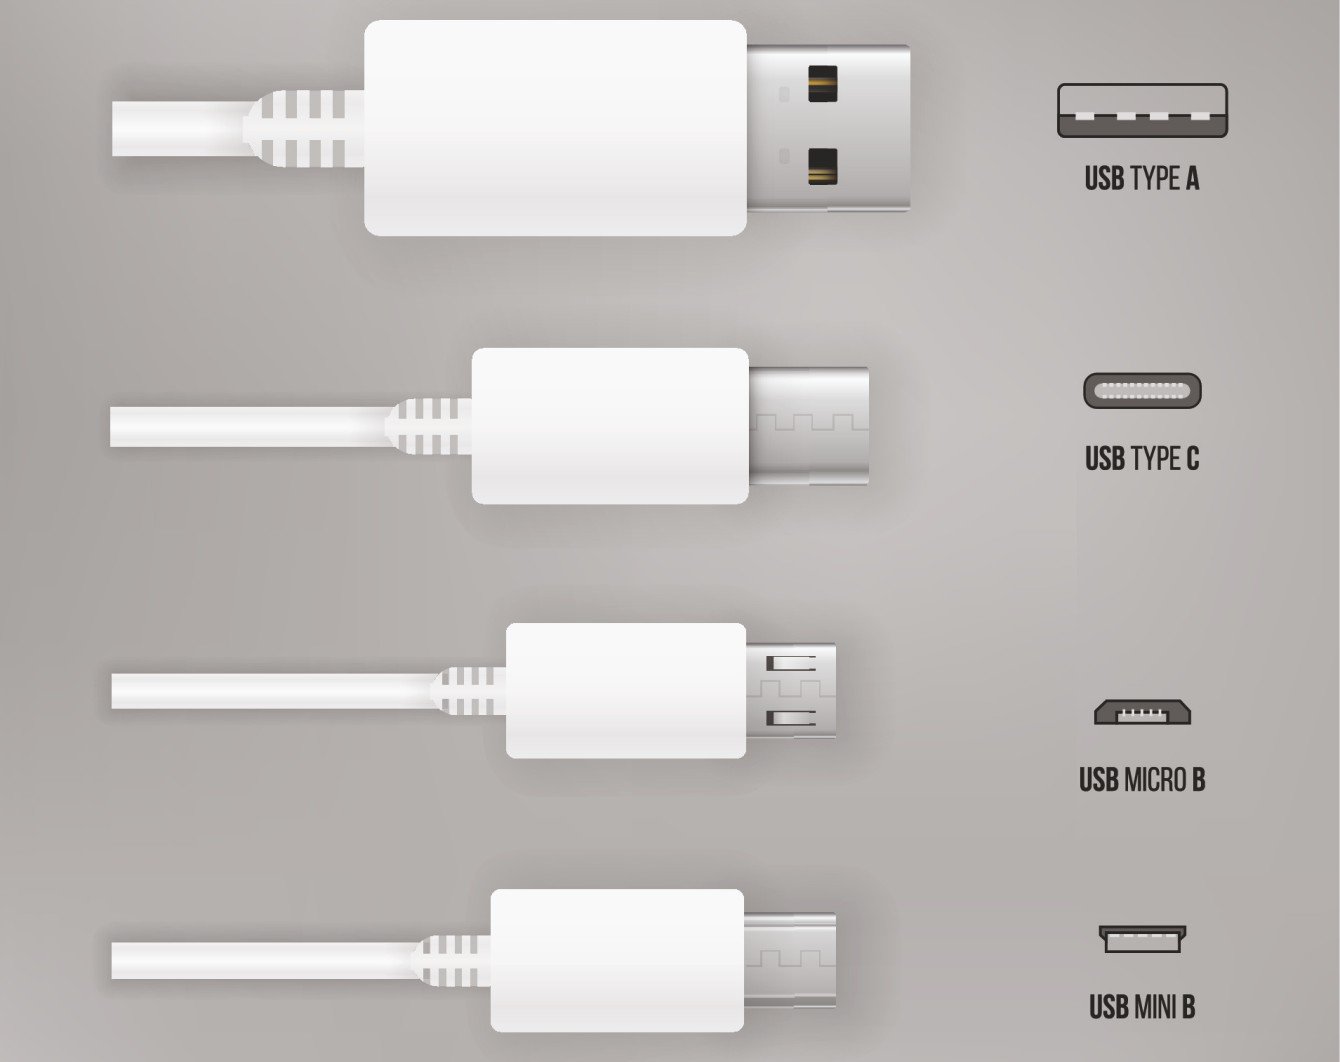 are the differences between USB type?